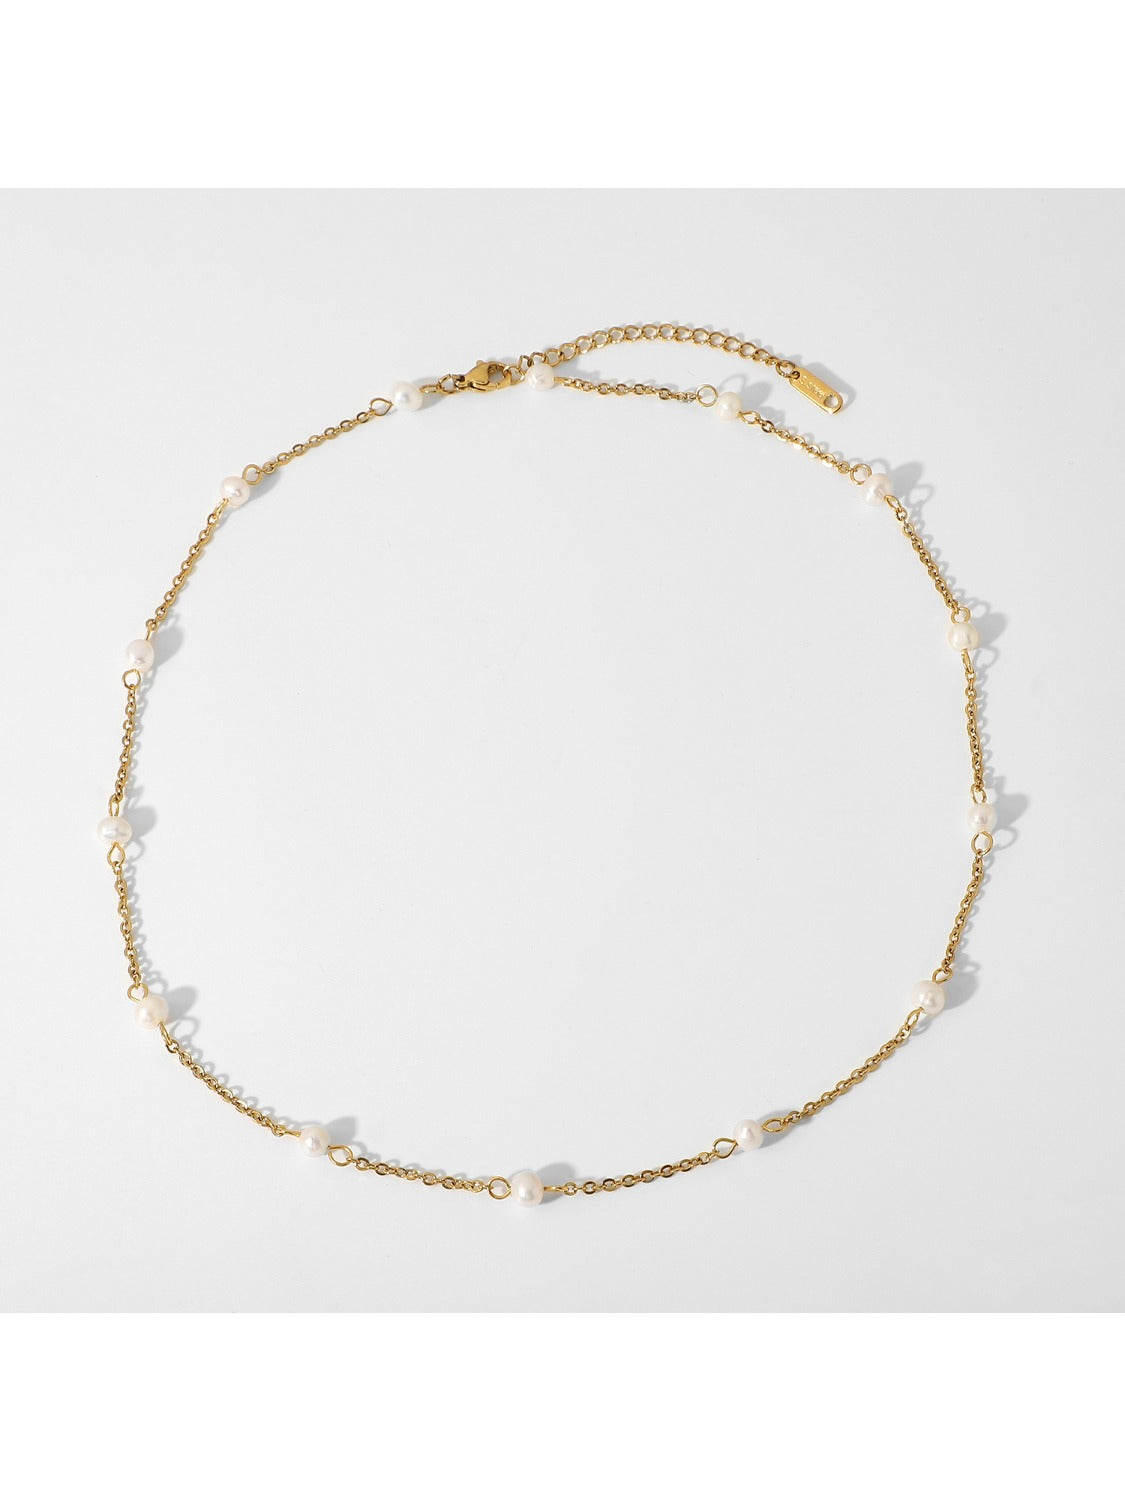 Women's Bead Necklace With Thin Gold Link